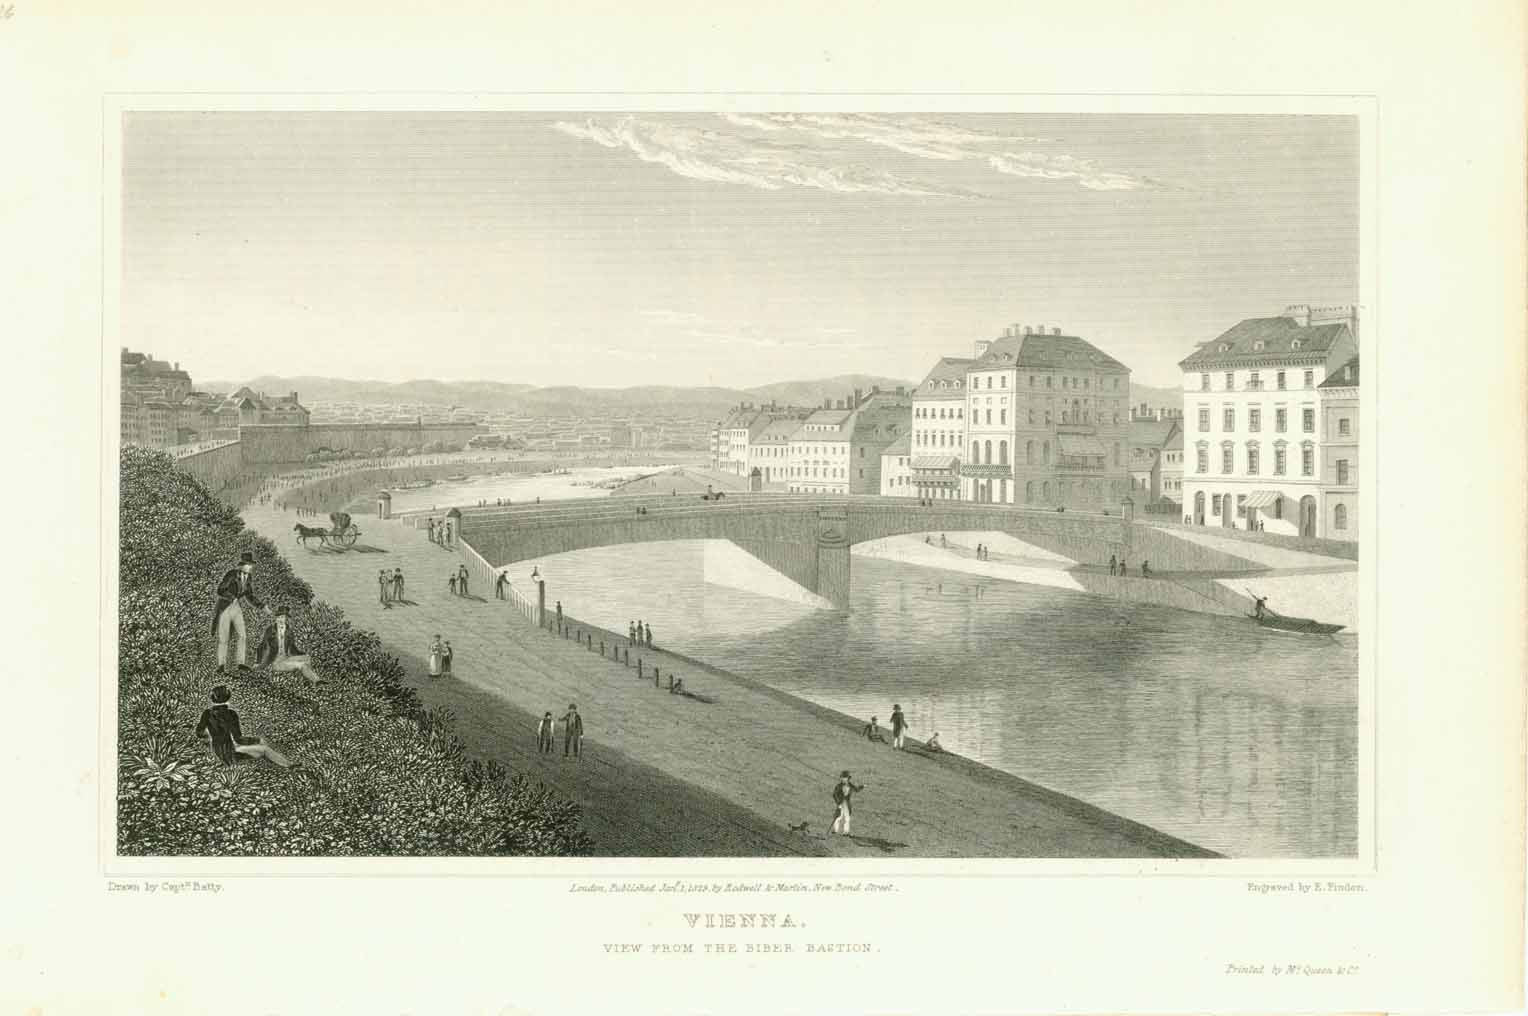 "Vienna" "View from the Biber Bastion"  Steel engraving by E. Finden after Captn. Batty. Dated 1823.  Extra page with a short article in English about this view in Vienna.